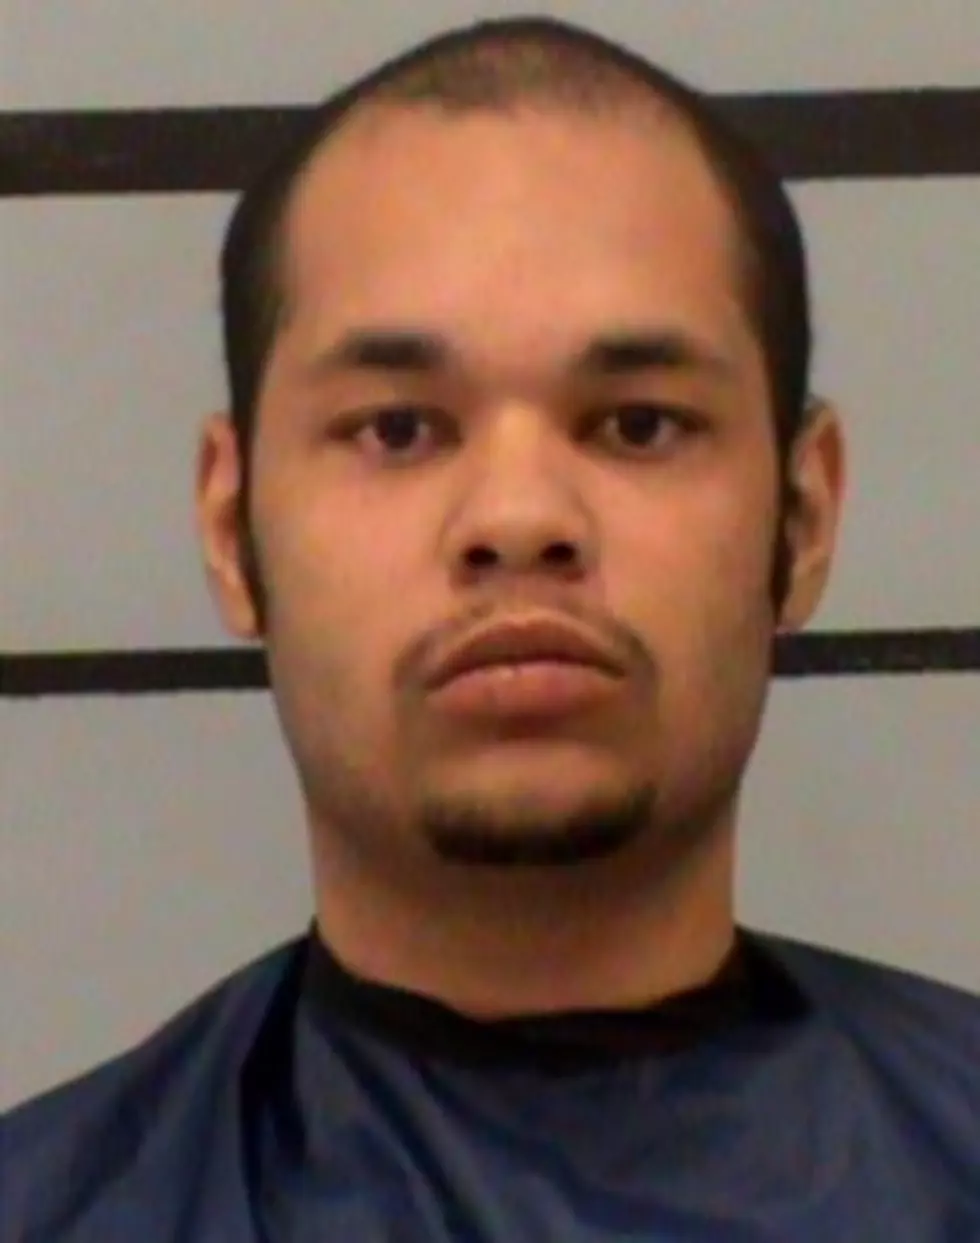 Lubbock Man Indicted for Burning Baby&#8217;s Foot With Scalding Water